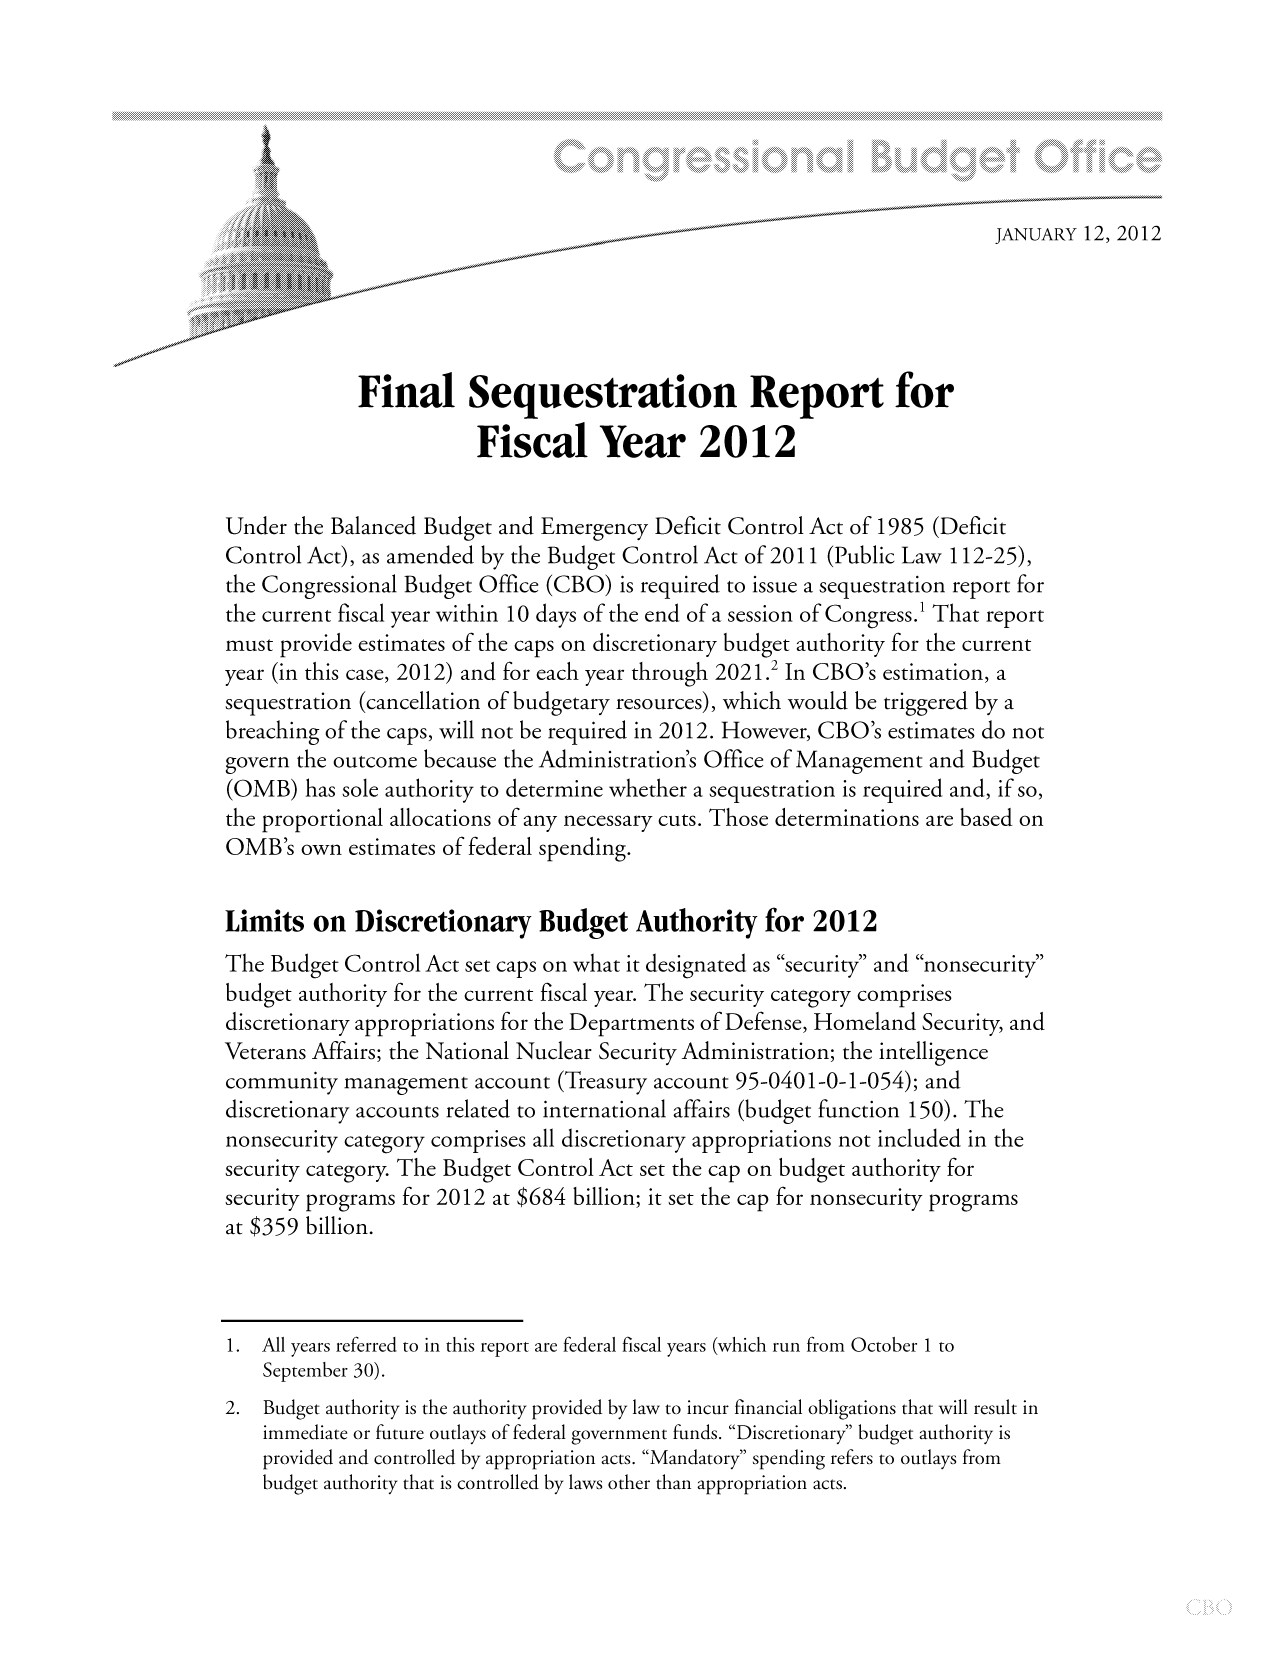 handle is hein.congrec/cbo10607 and id is 1 raw text is: JANUARY 12, 2012
Final Sequestration Report for
Fiscal Year 2012
Under the Balanced Budget and Emergency Deficit Control Act of 1985 (Deficit
Control Act), as amended by the Budget Control Act of 2011 (Public Law 112-25),
the Congressional Budget Office (CBO) is required to issue a sequestration report for
the current fiscal year within 10 days of the end of a session of Congress.1 That report
must provide estimates of the caps on discretionary budget authority for the current
year (in this case, 2012) and for each year through 2021.2 In CBO's estimation, a
sequestration (cancellation of budgetary resources), which would be triggered by a
breaching of the caps, will not be required in 2012. However, CBO's estimates do not
govern the outcome because the Administration's Office of Management and Budget
(OMB) has sole authority to determine whether a sequestration is required and, if so,
the proportional allocations of any necessary cuts. Those determinations are based on
OMB's own estimates of federal spending.
Limits on Discretionary Budget Authority for 2012
The Budget Control Act set caps on what it designated as security and nonsecurity
budget authority for the current fiscal year. The security category comprises
discretionary appropriations for the Departments of Defense, Homeland Security, and
Veterans Affairs; the National Nuclear Security Administration; the intelligence
community management account (Treasury account 95-0401-0-1-054); and
discretionary accounts related to international affairs (budget function 150). The
nonsecurity category comprises all discretionary appropriations not included in the
security category. The Budget Control Act set the cap on budget authority for
security programs for 2012 at $684 billion; it set the cap for nonsecurity programs
at $359 billion.
1.All years referred to in this report are federal fiscal years (which run from October 1 to
September 30).
2. Budget authority is the authority provided by law to incur financial obligations that will result in
immediate or future outlays of federal government funds. Discretionary budget authority is
provided and controlled by appropriation acts. Mandatory spending refers to outlays from
budget authority that is controlled by laws other than appropriation acts.


